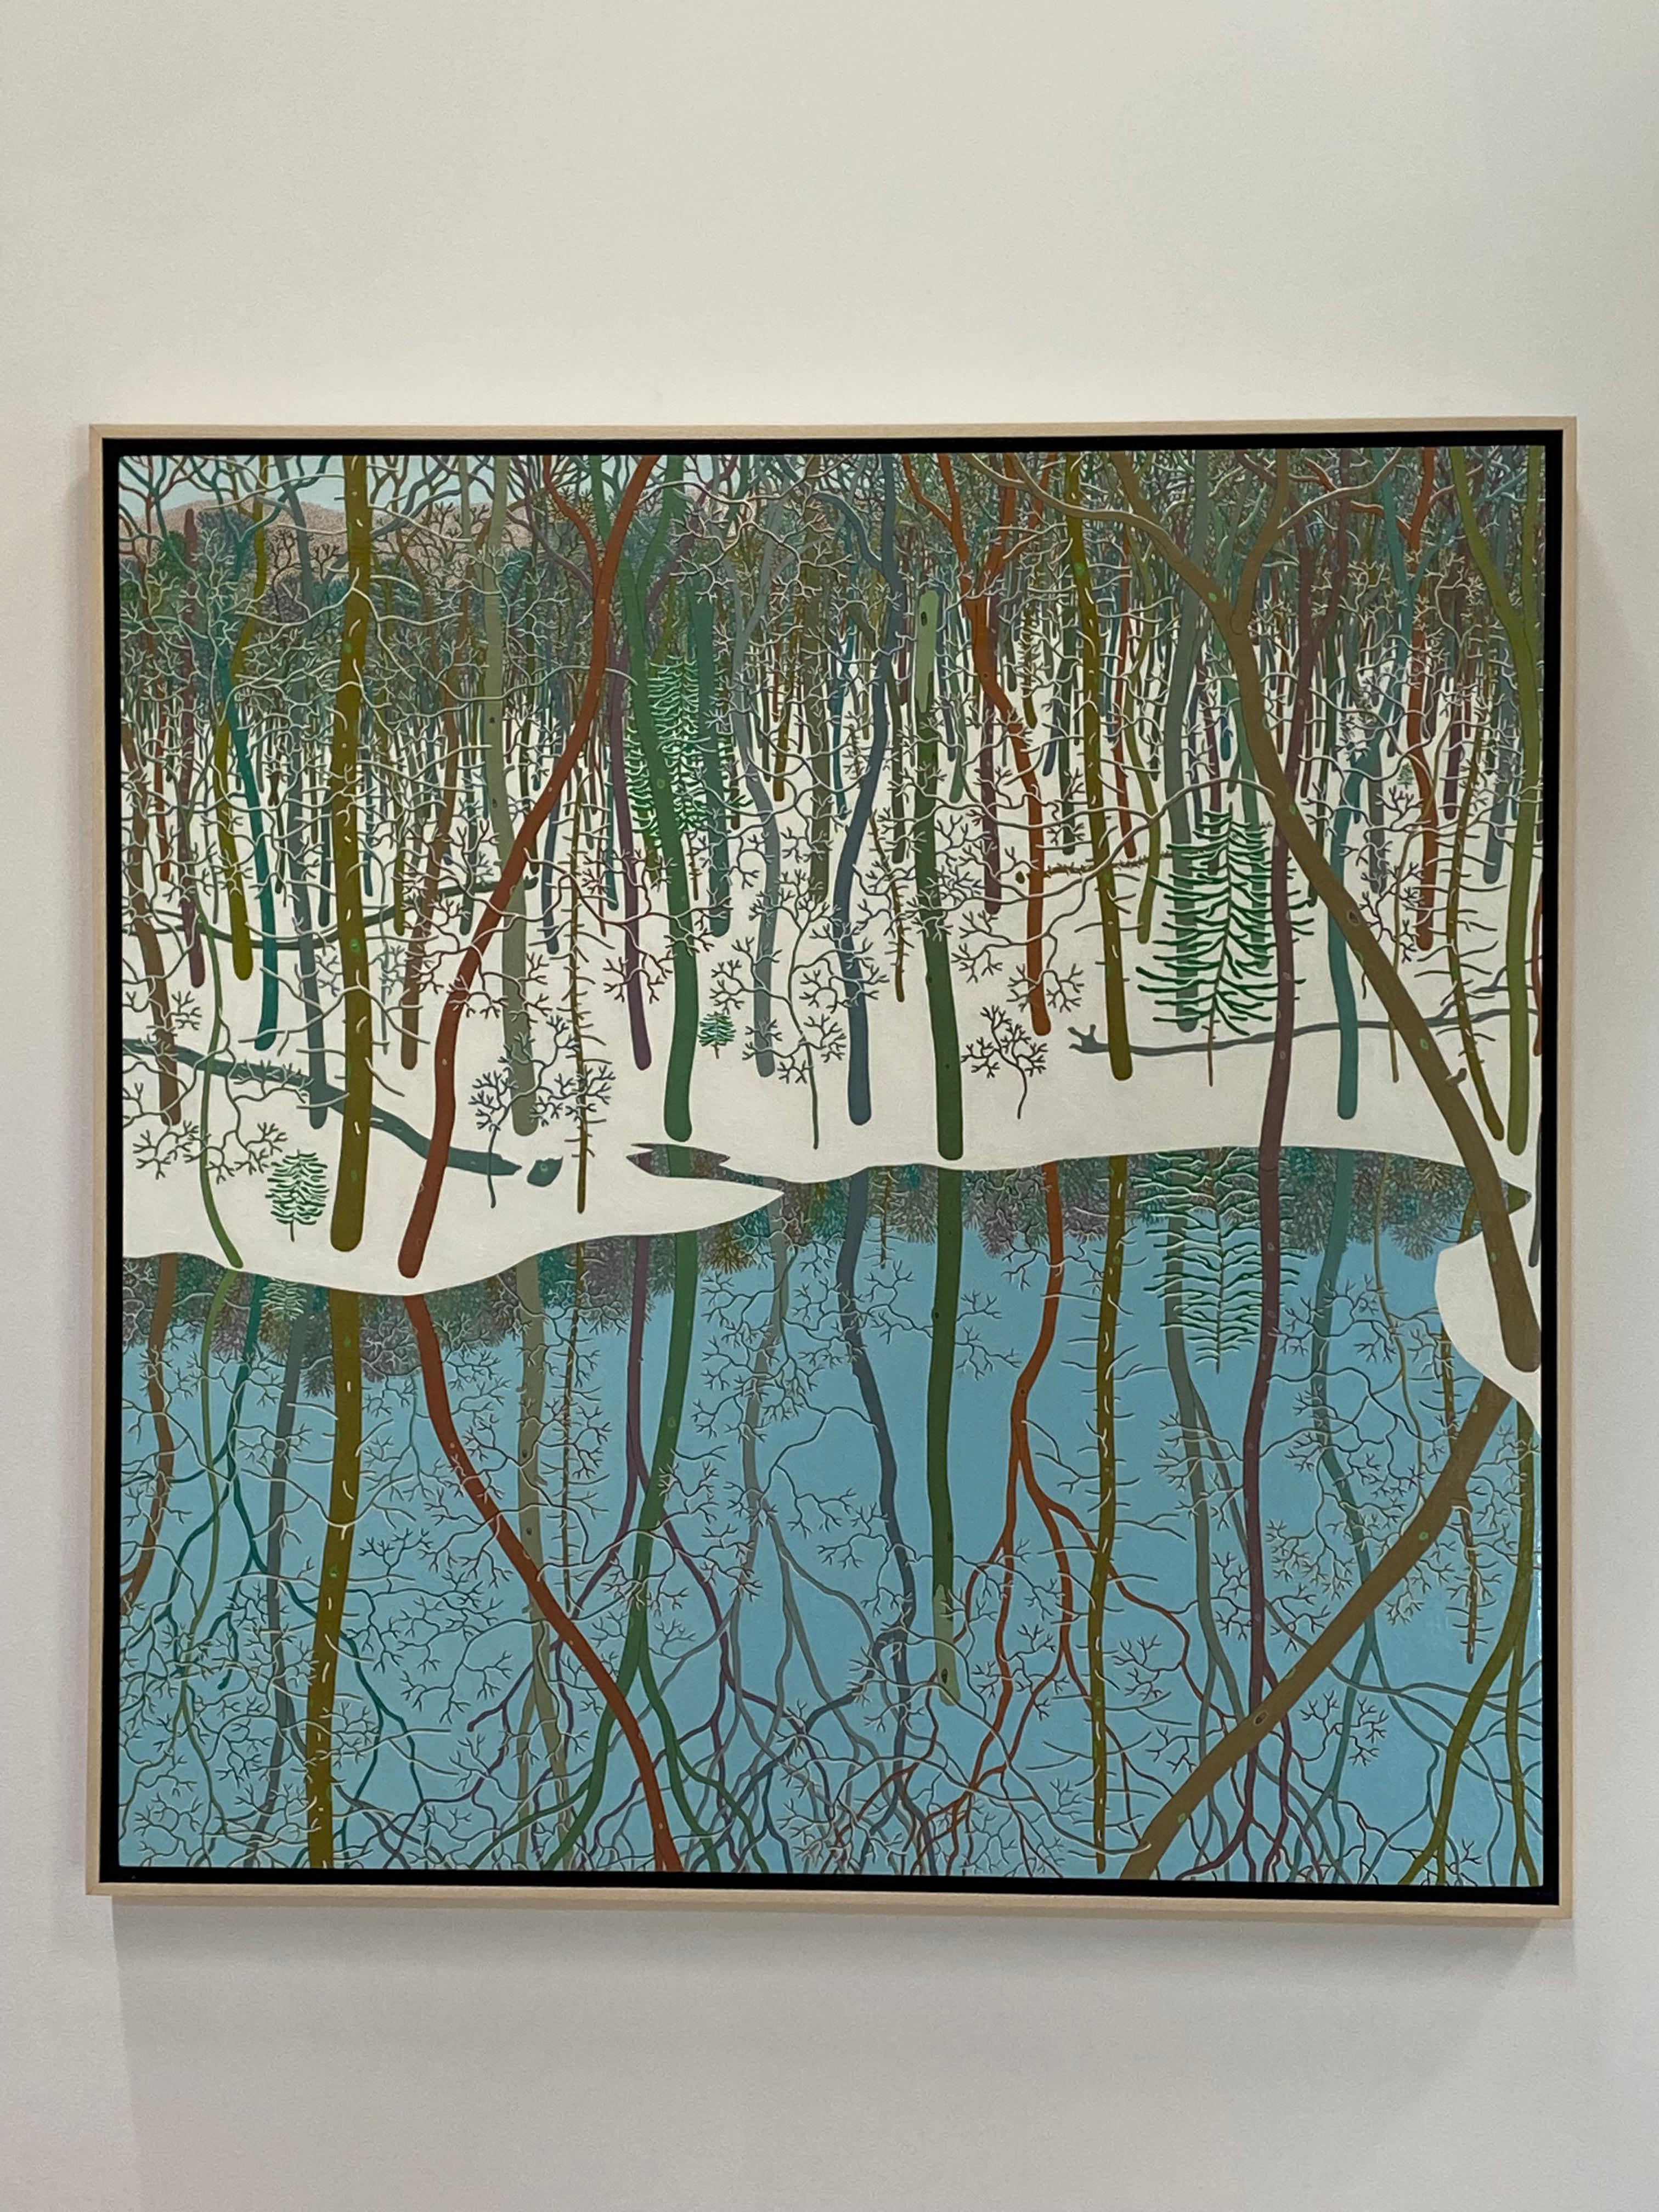 Winter Pond Wyatt Mt, February, Landscape, Snowy Woods, Water, Trees, White Snow - Painting by Gregory Hennen